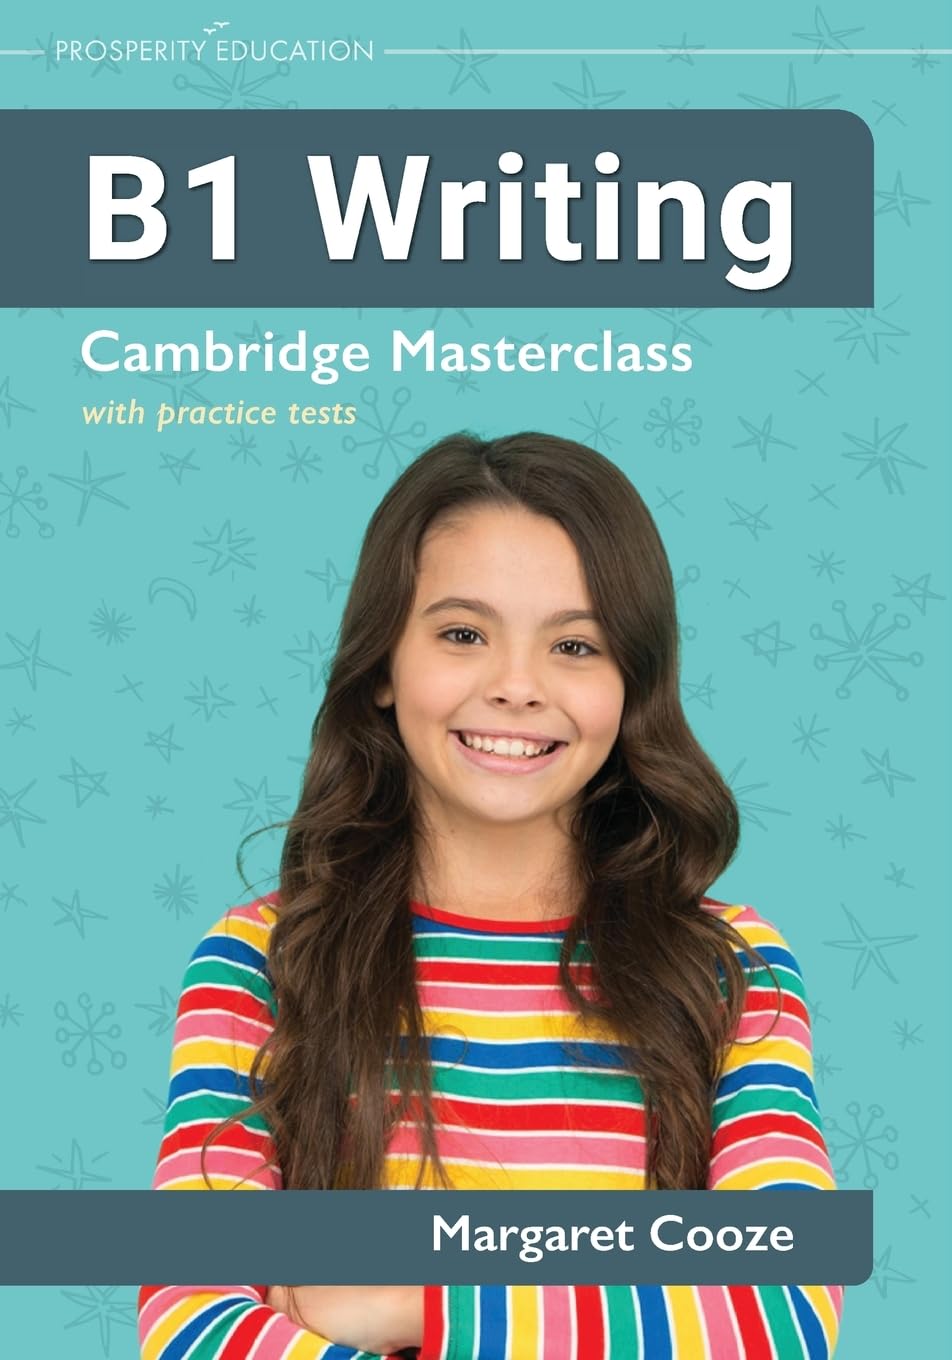 B1 Writing Cambridge Masterclass With Practice Tests | Margaret Cooze